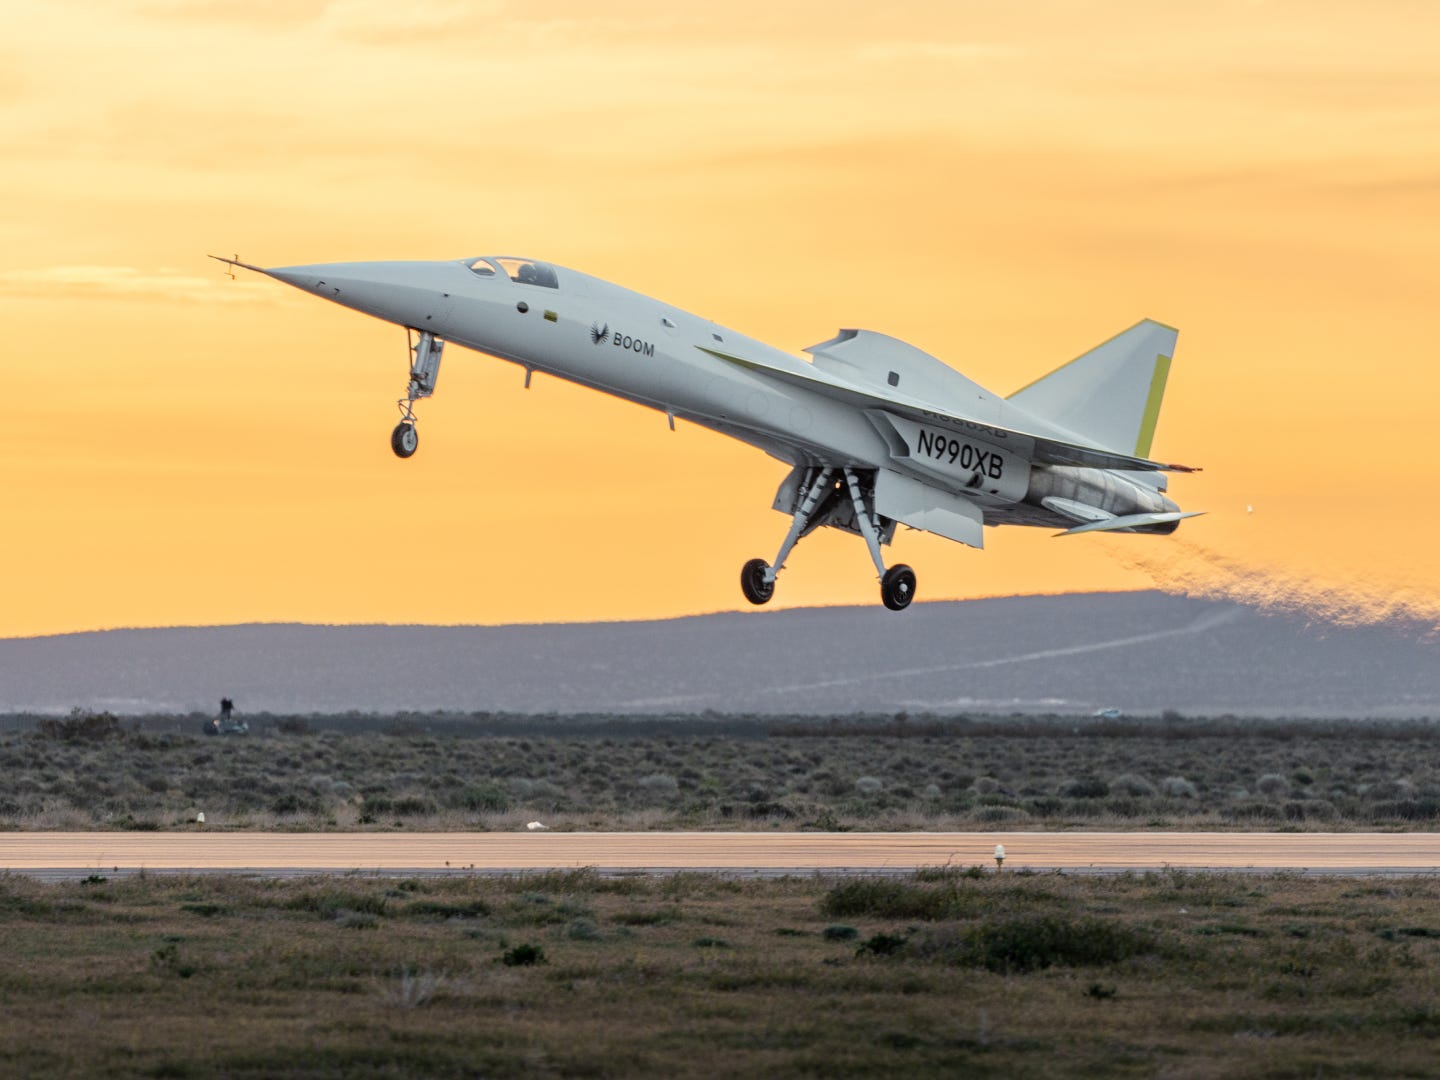 <p>Boom said the envelope for range, speed, and altitude expands over time and several phases of testing, and its XB-1 inaugural represents just a fraction of what the <a href="https://www.businessinsider.com/meet-overture-the-boom-supersonic-aircraft-that-united-just-ordered-2021-6">Overture will be built to fly</a>. </p><p>According to Boom, its future faster-than-sound plane is expected to bolt at speeds of up to Mach 1.7, or about 1,300 mph, and cruise at up to 60,000 feet — meaning the plane could connect New York City and London in as little as three and a half hours.</p>